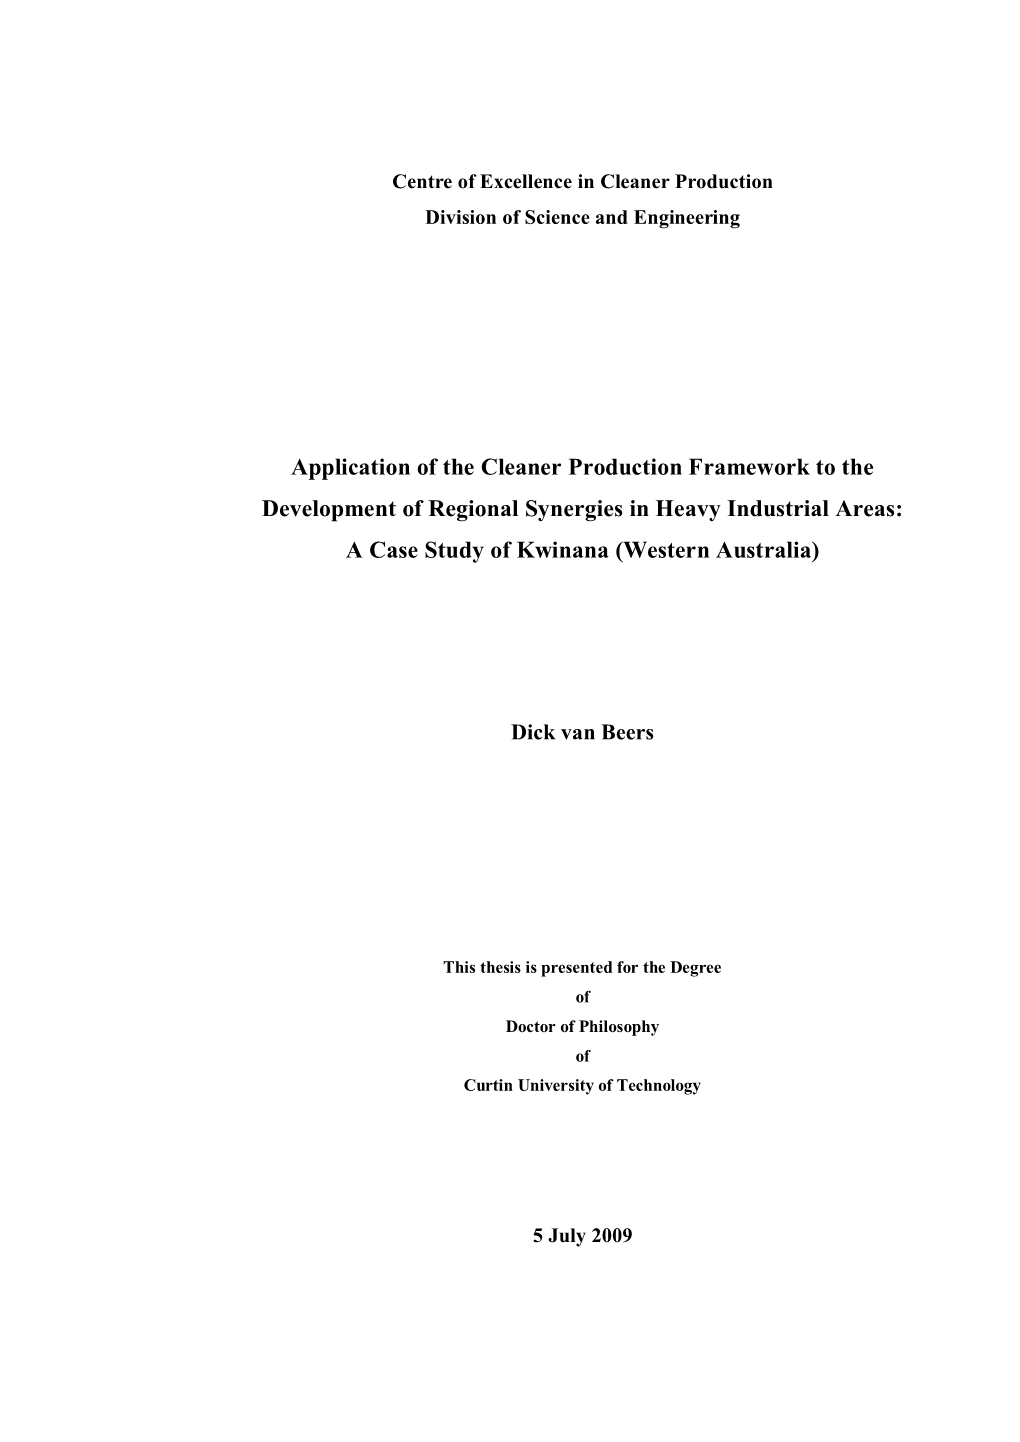 Application of the Cleaner Production Framework to the Development of Regional Synergies in Heavy Industrial Areas: a Case Study of Kwinana (Western Australia)